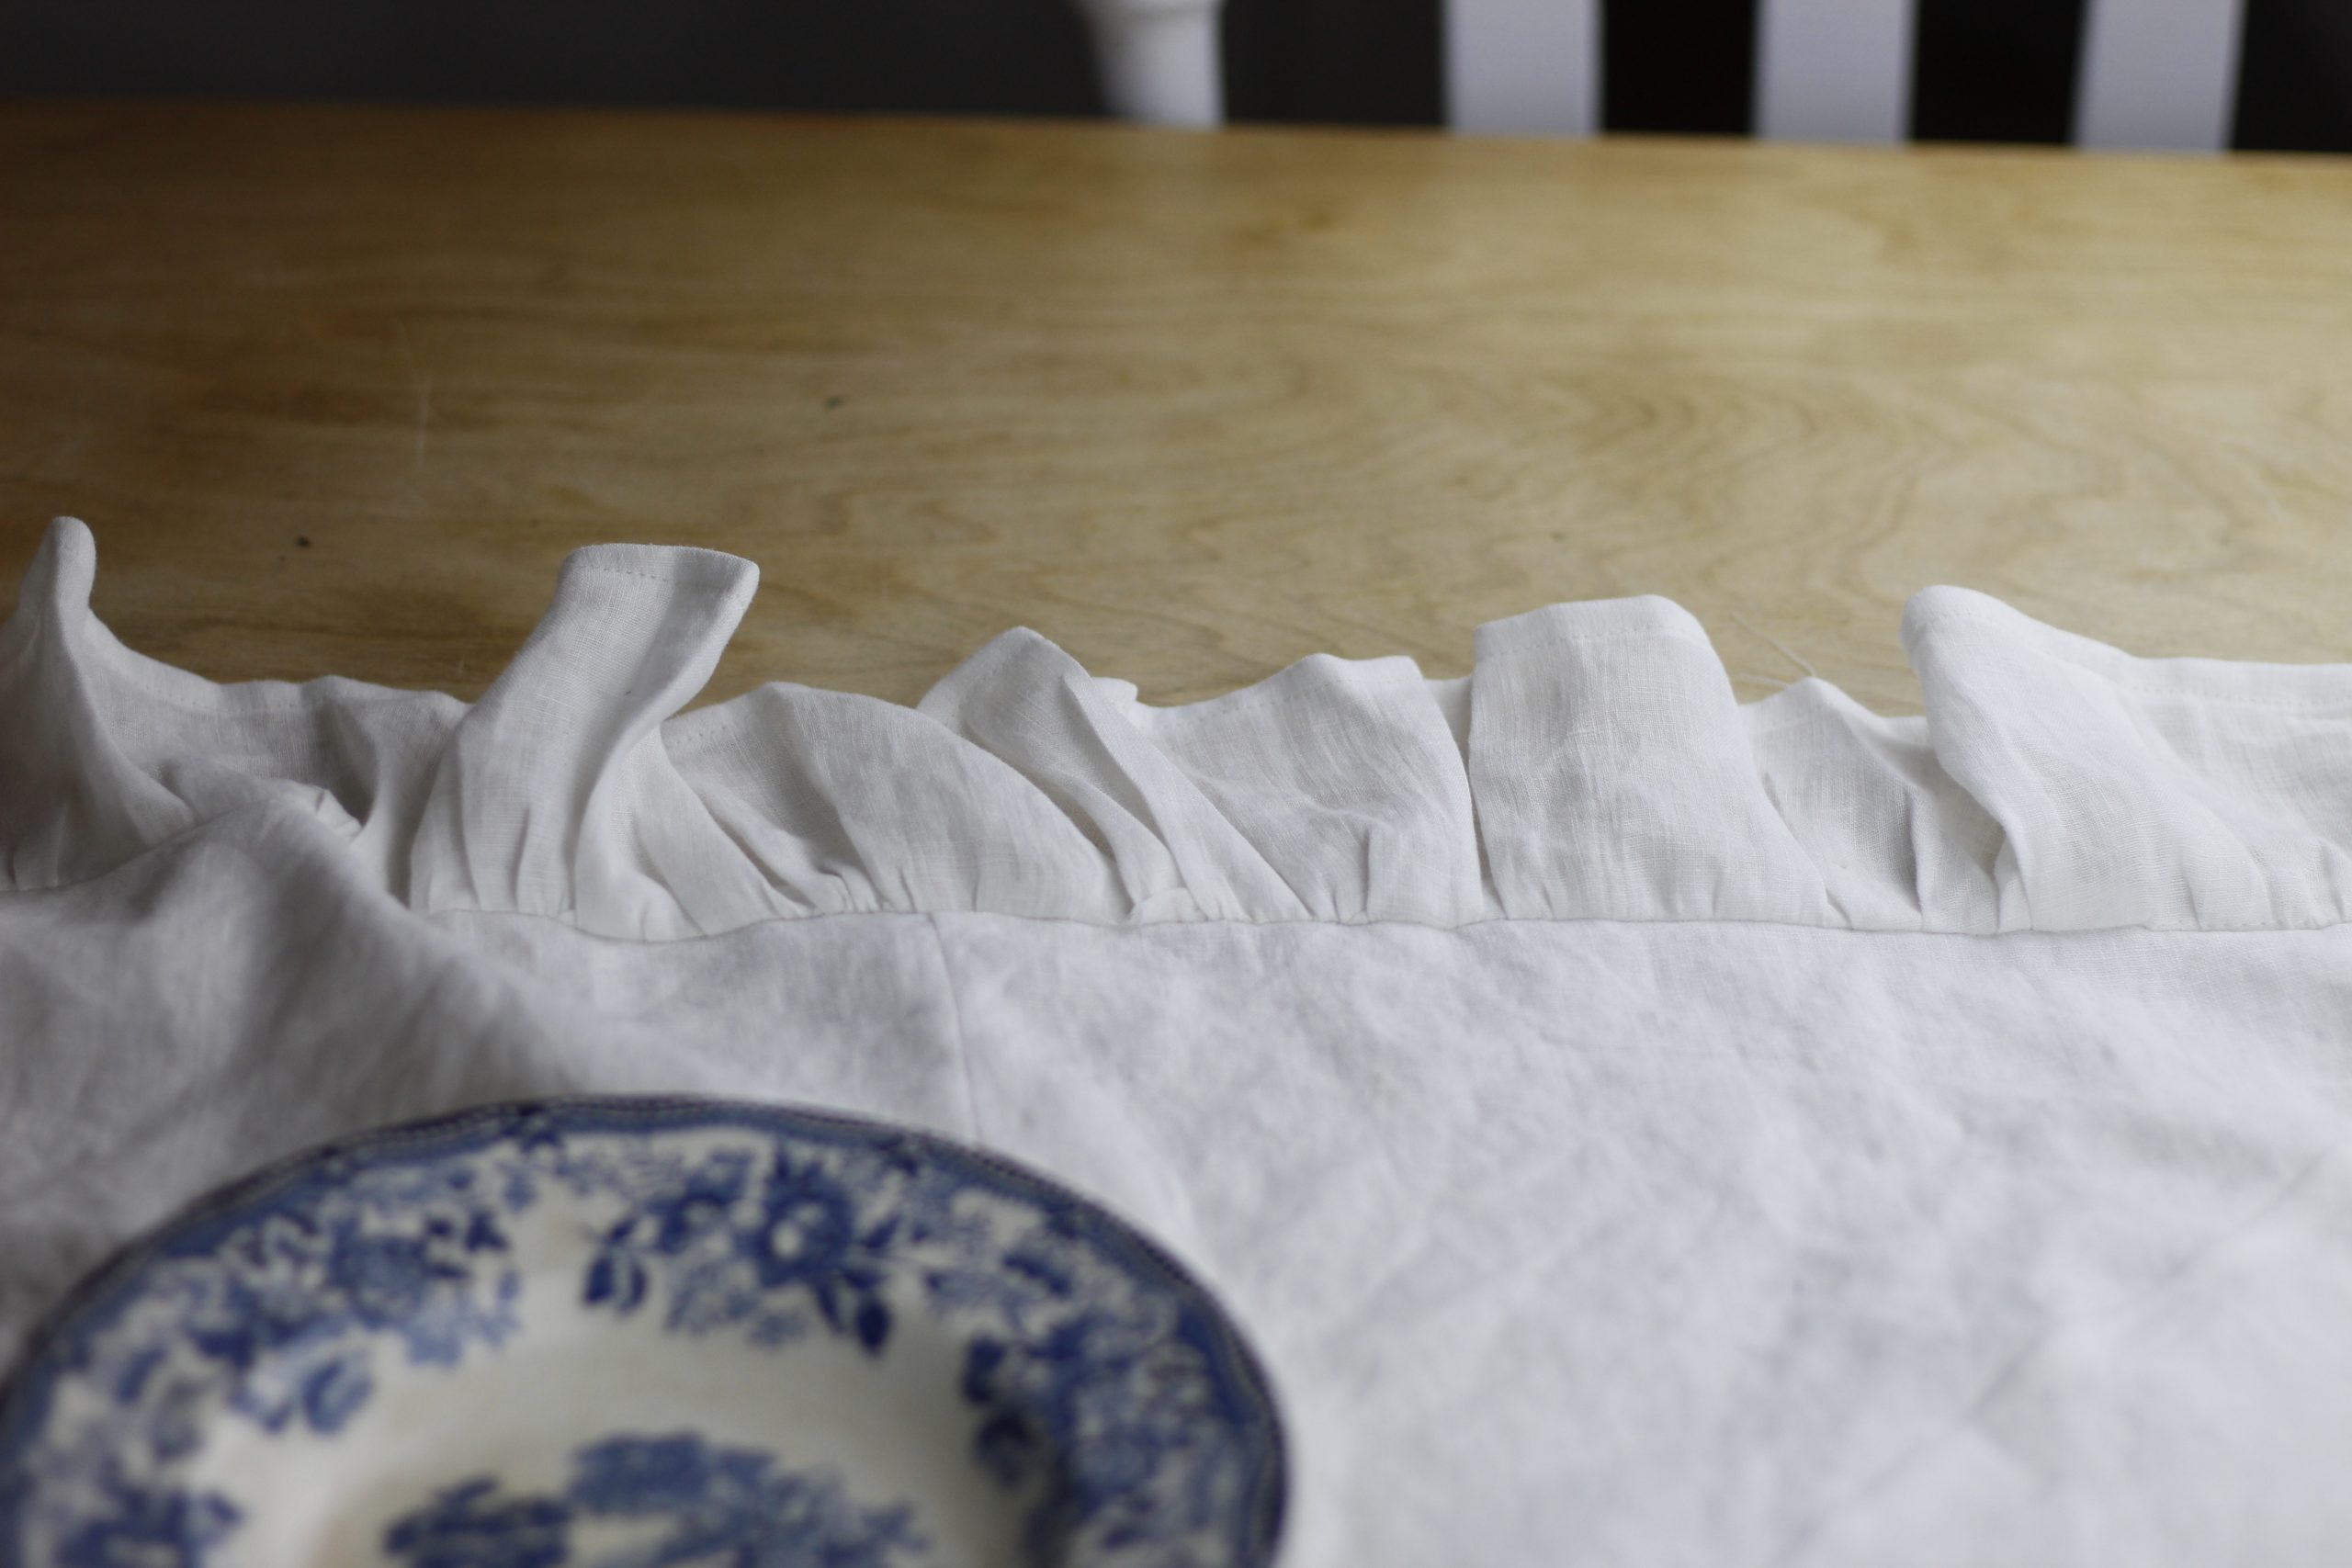 picture of finished sewn table runner on a table with a blue and white dish lying on it